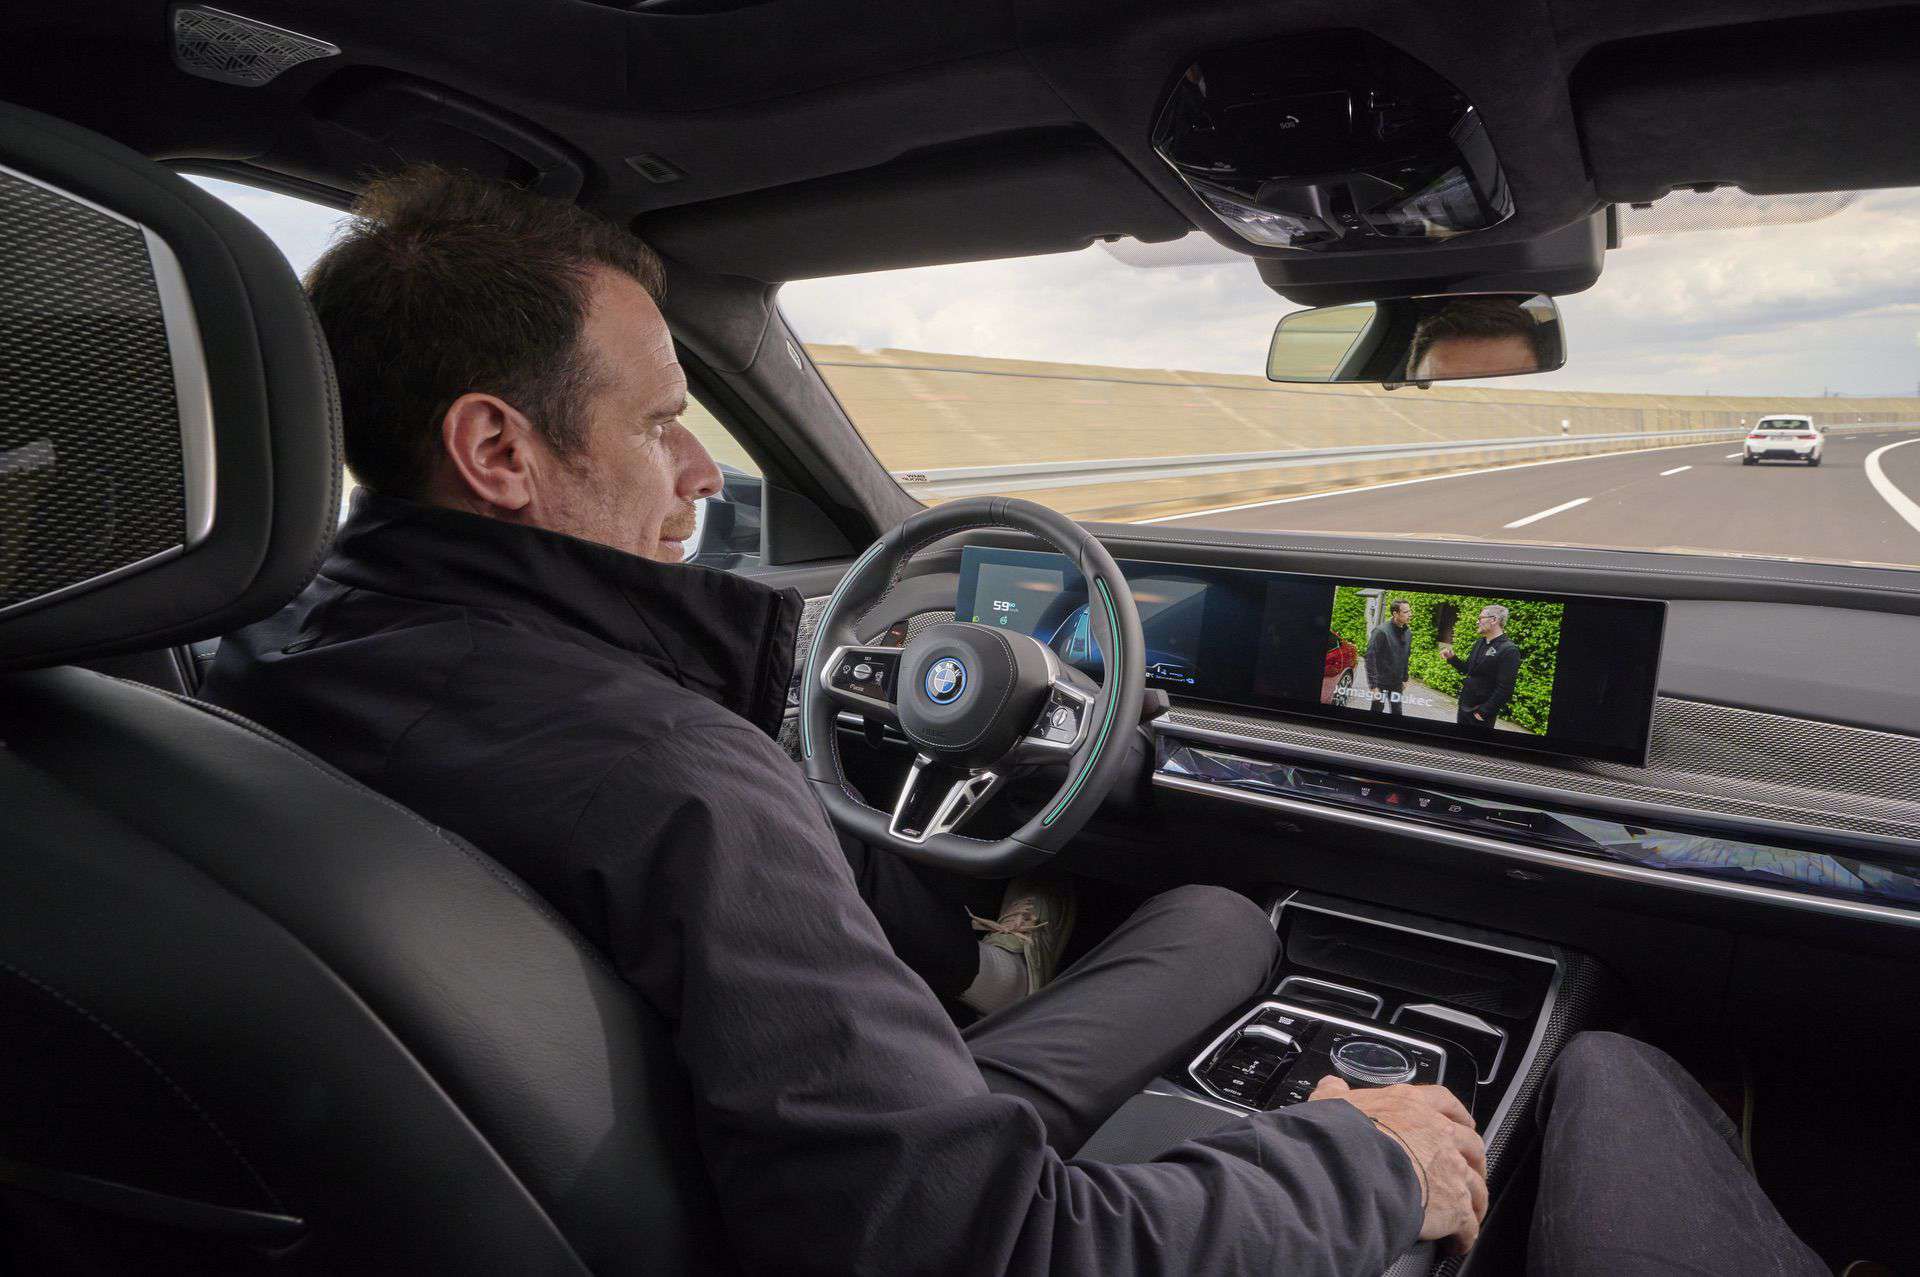 BMW Level 3 Self-Driving Could Eventually Come to the U.S.